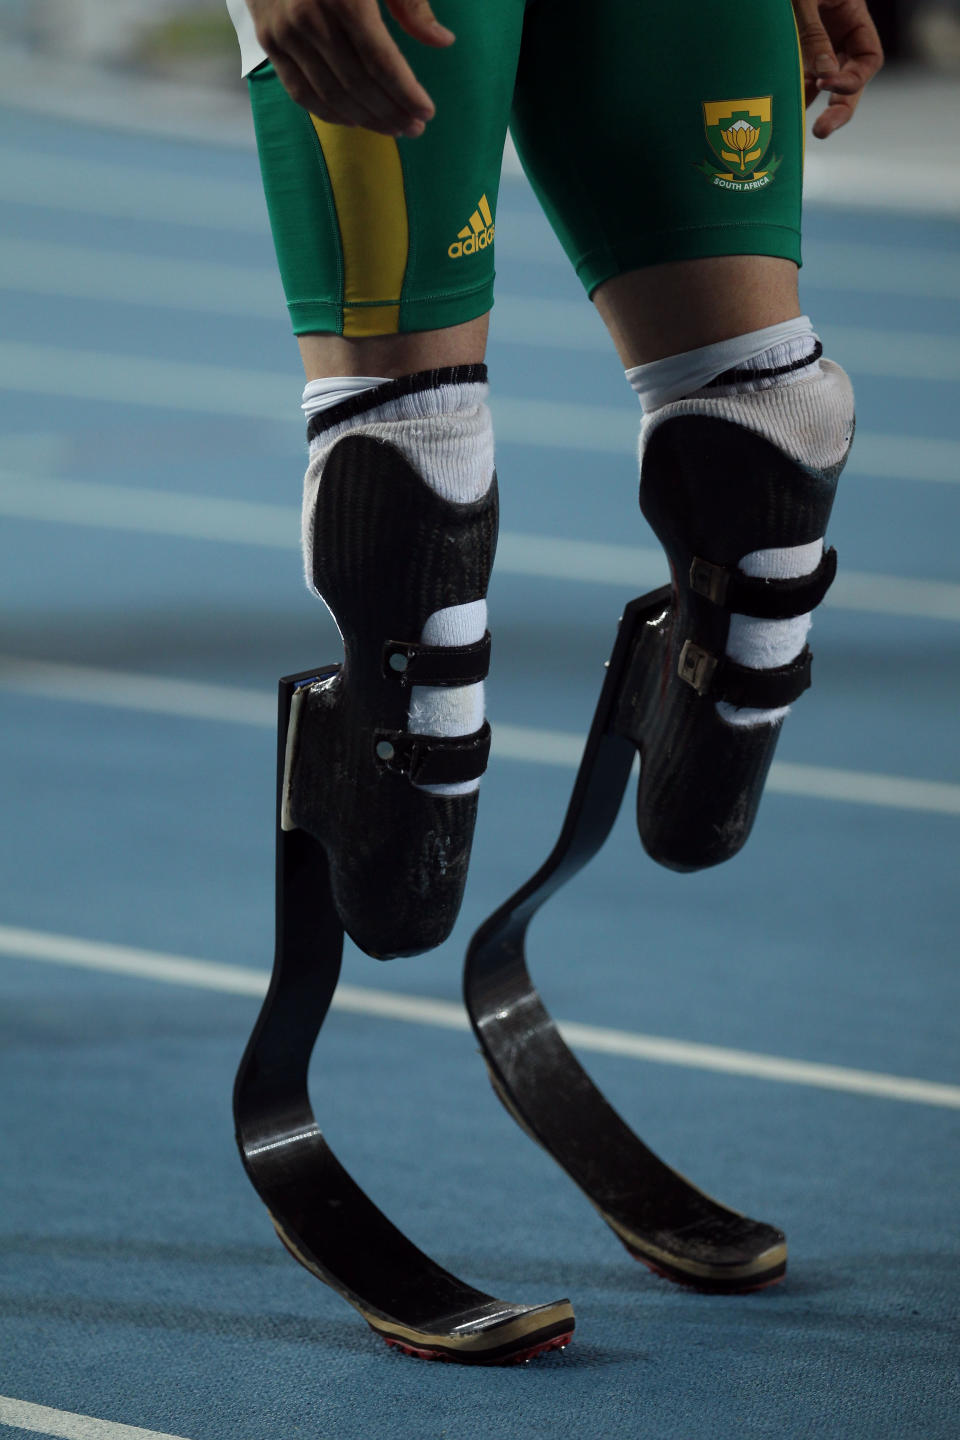 DAEGU, SOUTH KOREA - AUGUST 29: Oscar Pistorius of South Africa prepares to compete in the men's 400 metres semi finals during day three of the 13th IAAF World Athletics Championships at the Daegu Stadium on August 29, 2011 in Daegu, South Korea. (Photo by Chris McGrath/Getty Images)